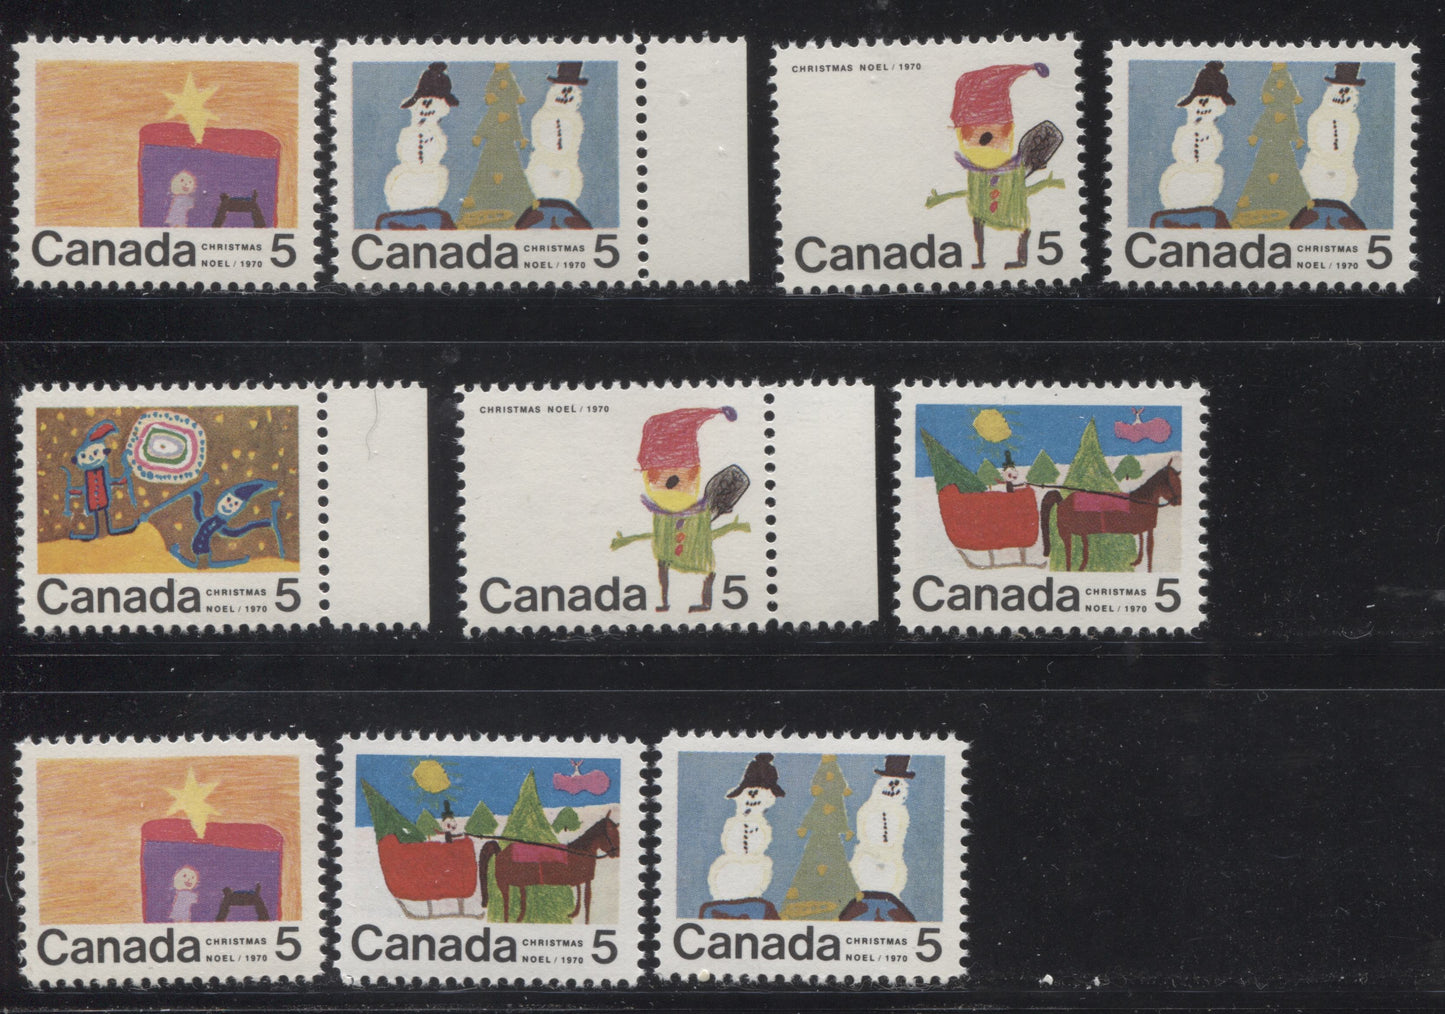 Lot 136 Canada #519/523 5c Multicoloured 1970 Christmas Issue, A Complete Set of 10 Constant Plate Varieties From Combination 7, Smooth HB11 Paper, Perf. 11.9